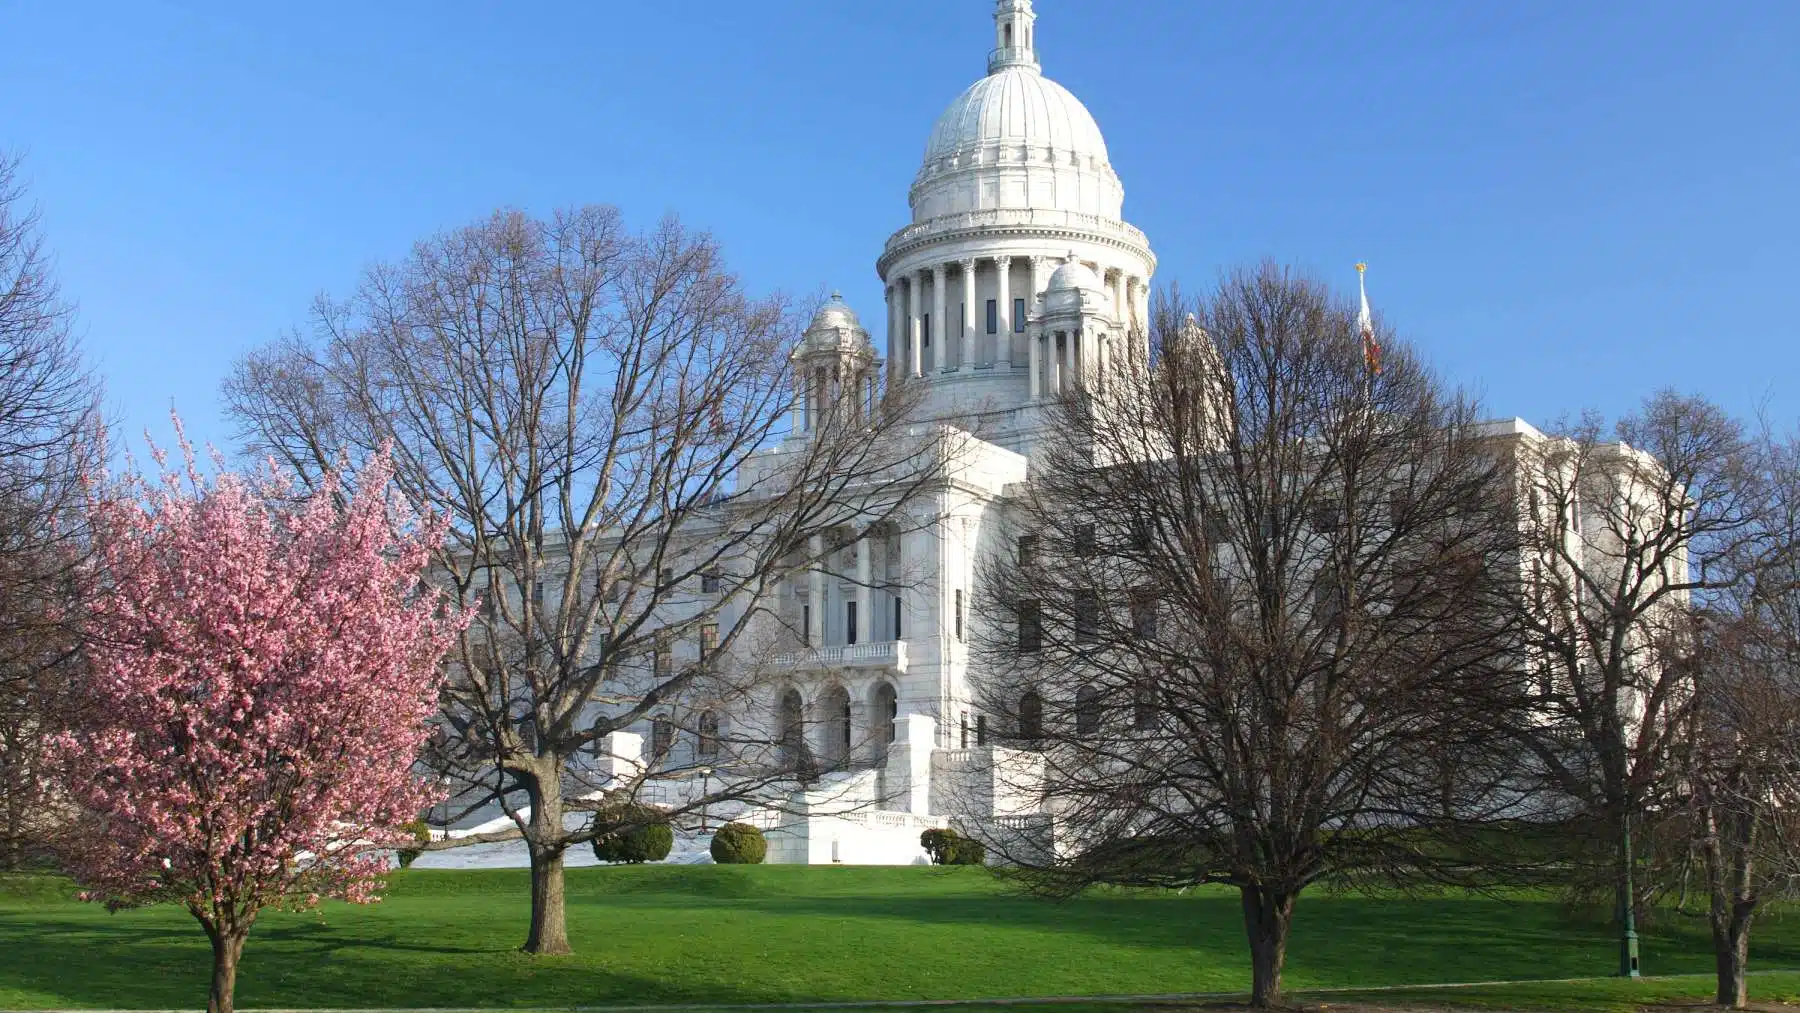 Rhode Island News: General Assembly to consider bill to halt evictions